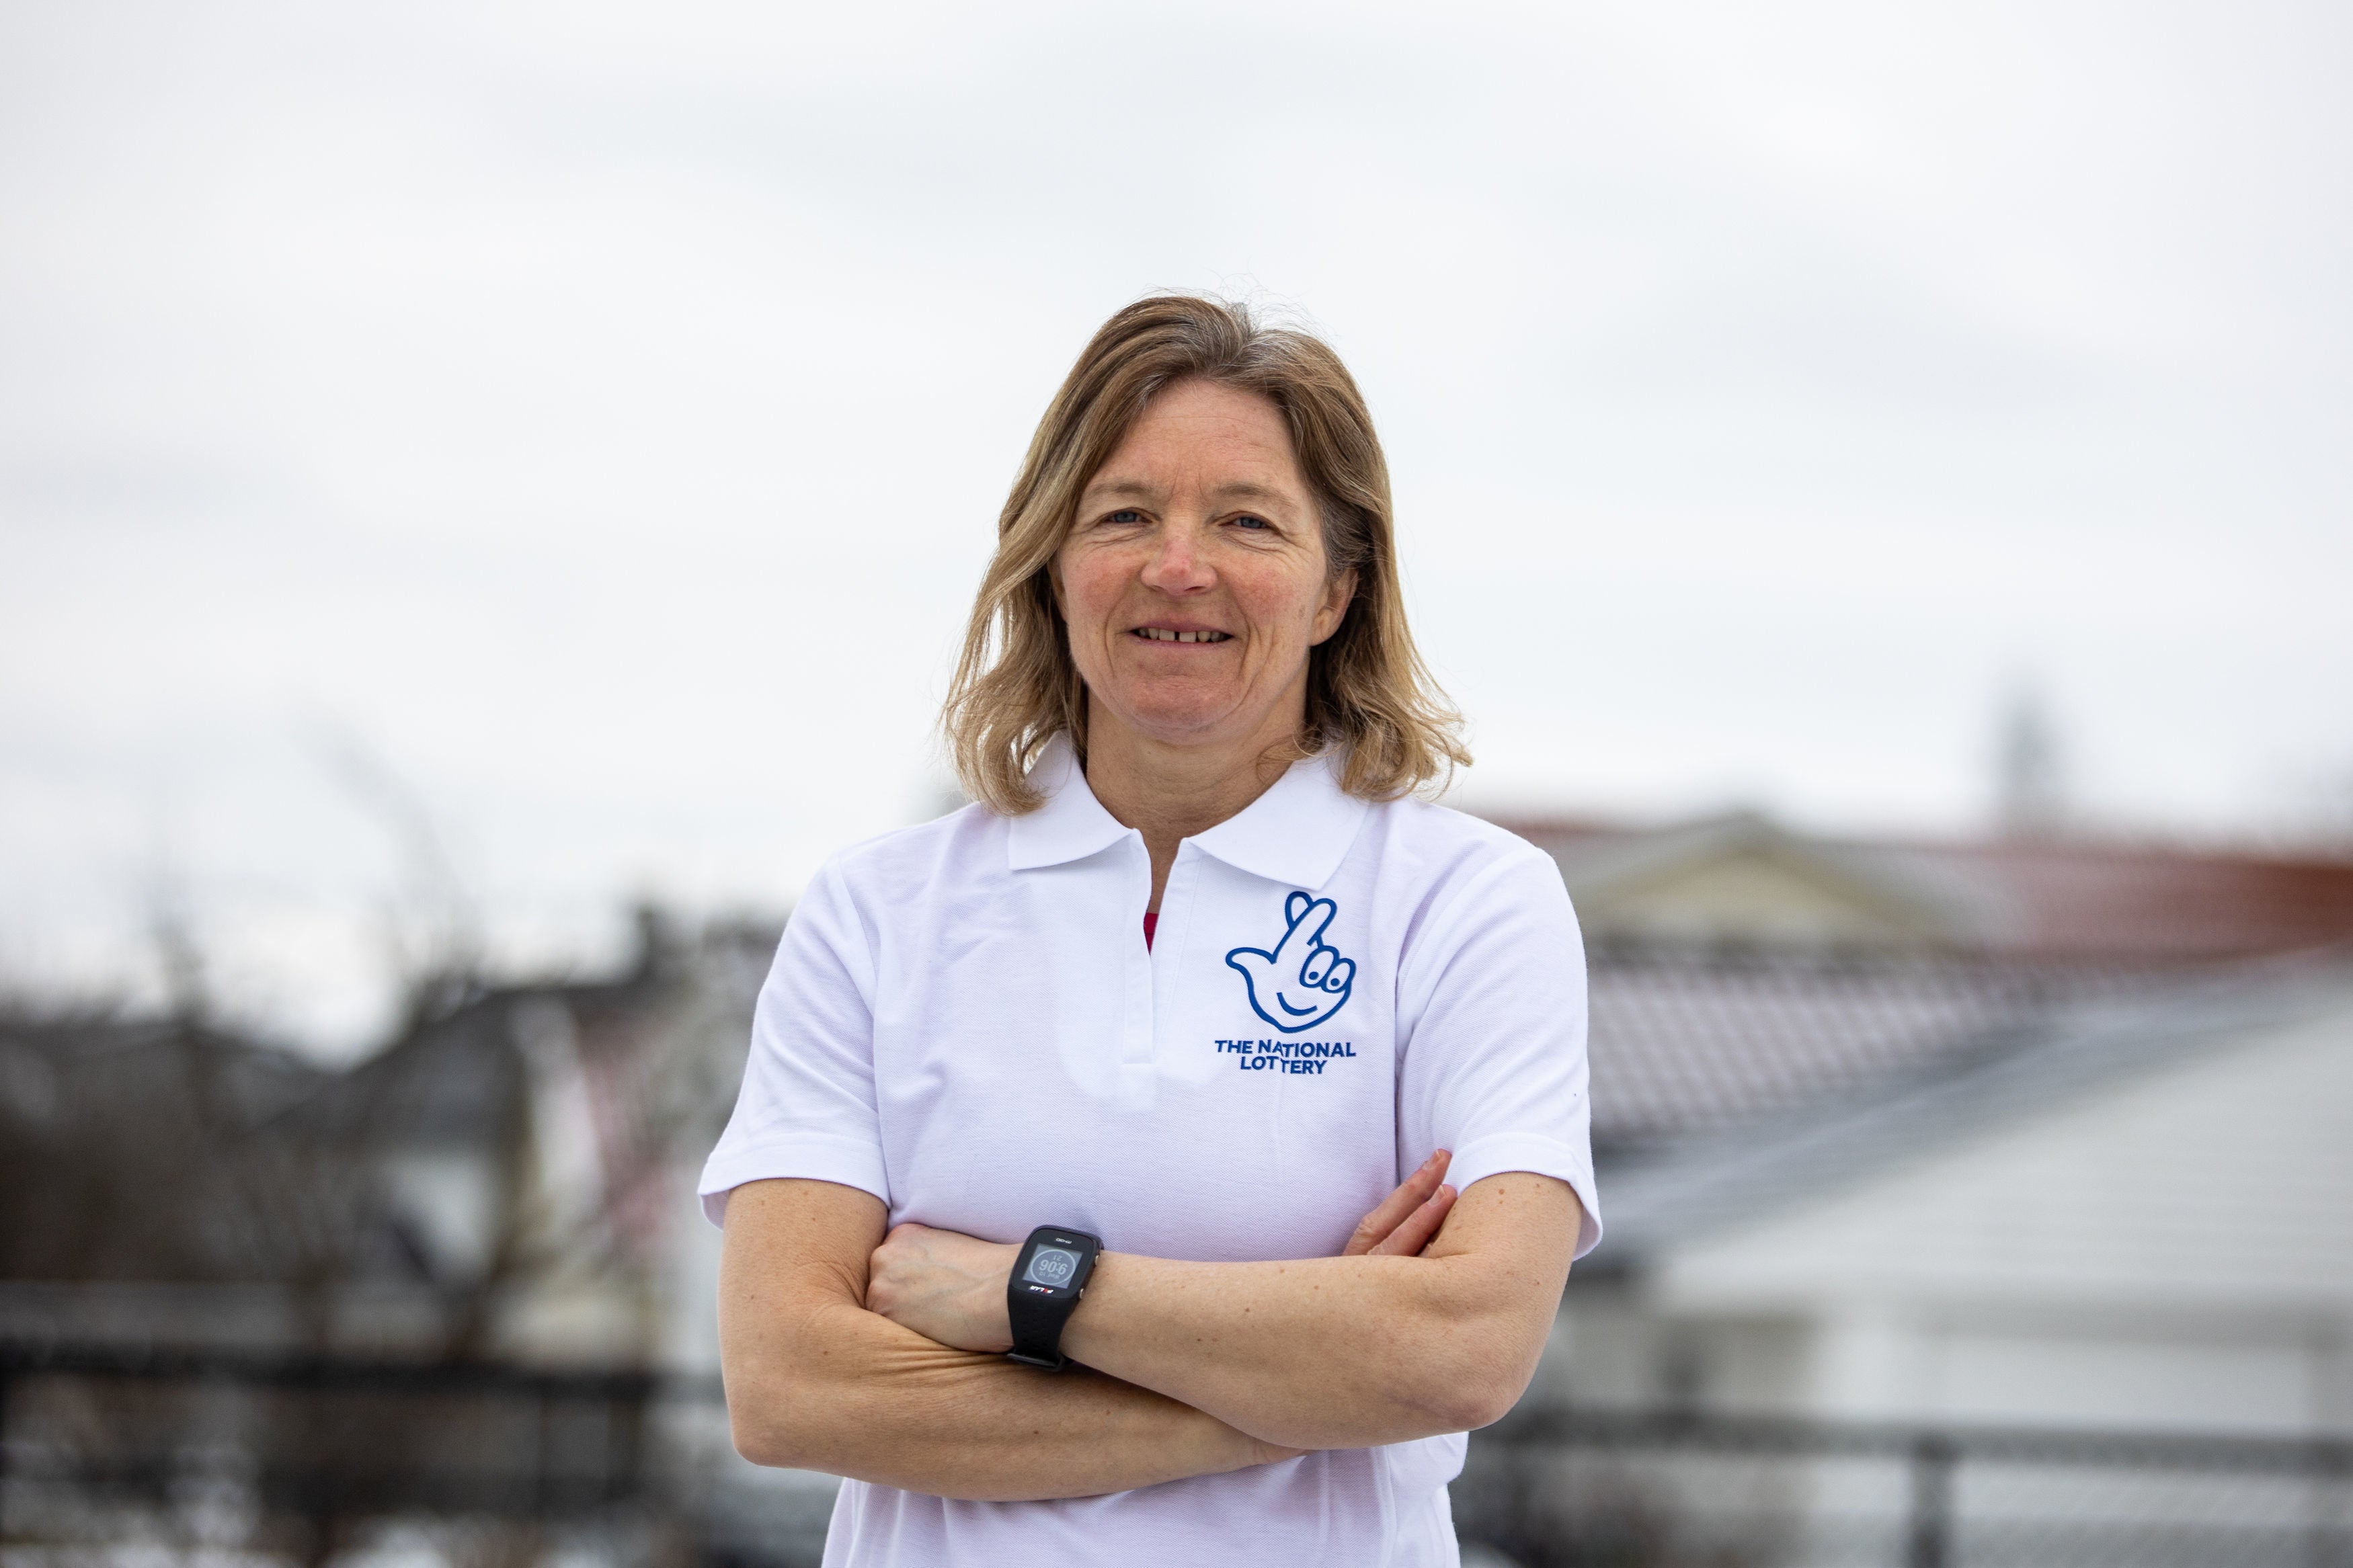 Hege Riise has been appointed head coach of GB women’s team